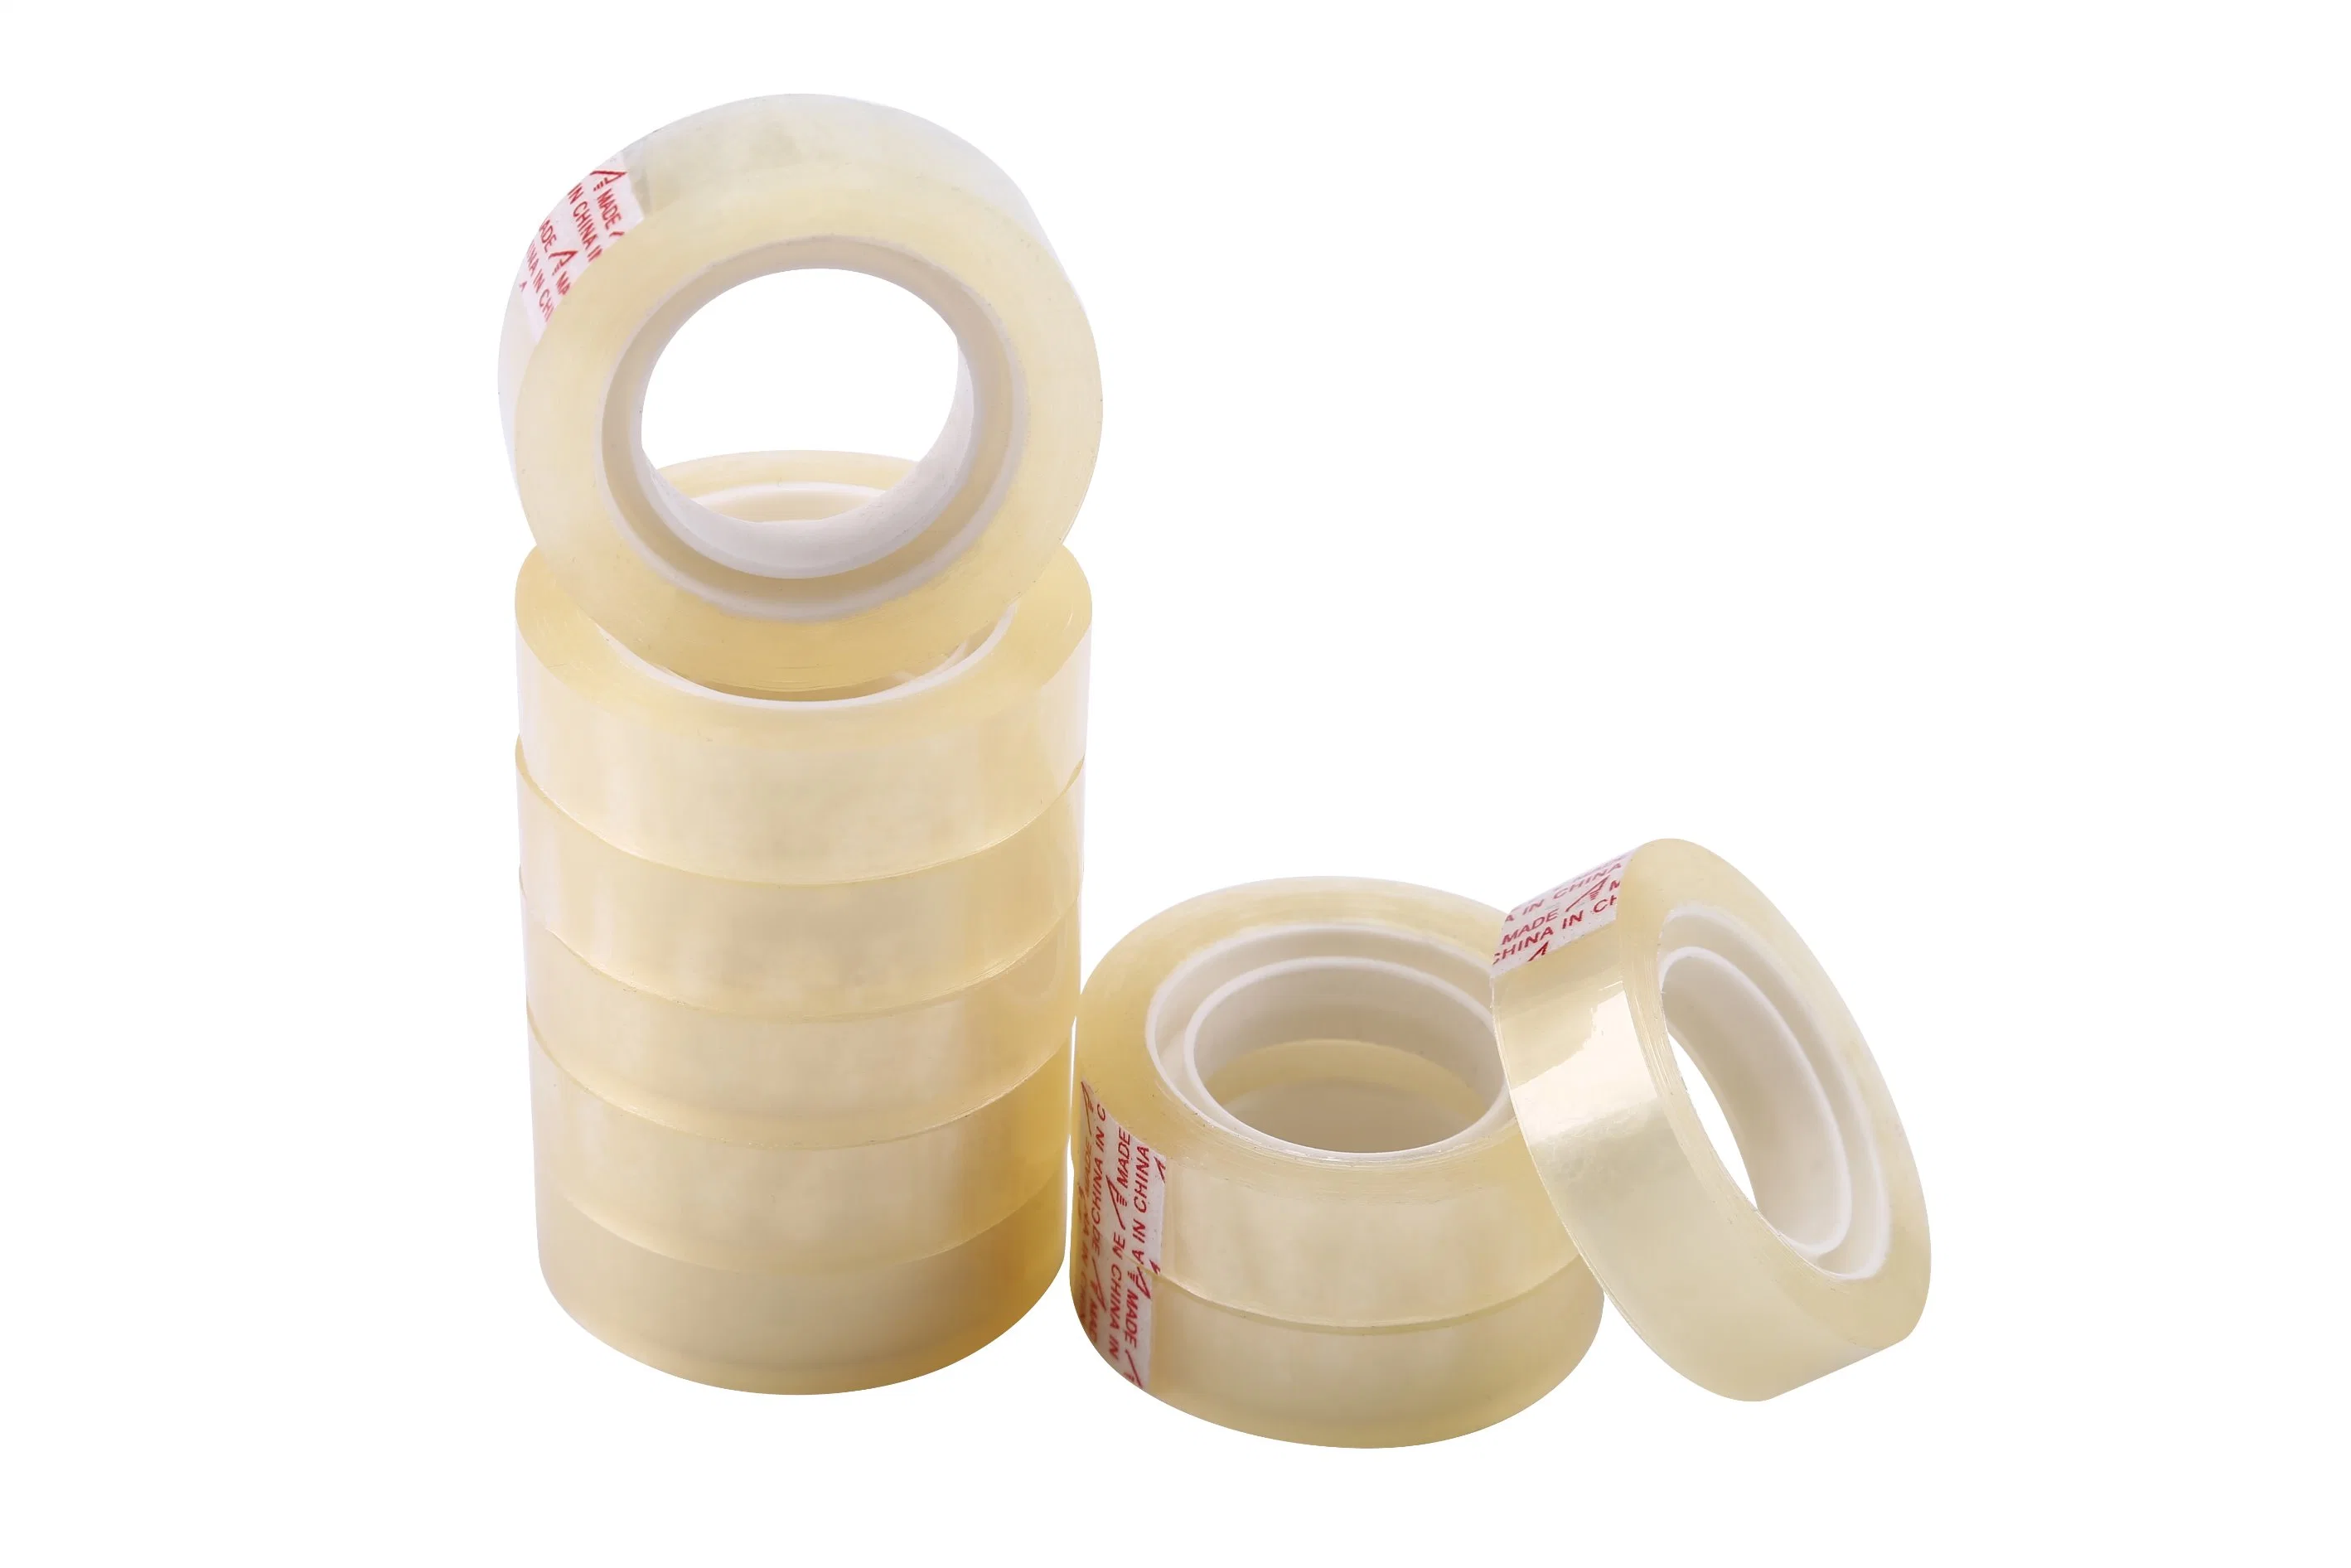 Super Clear BOPP Adhesive Stationery Packing Tape with Dispenser